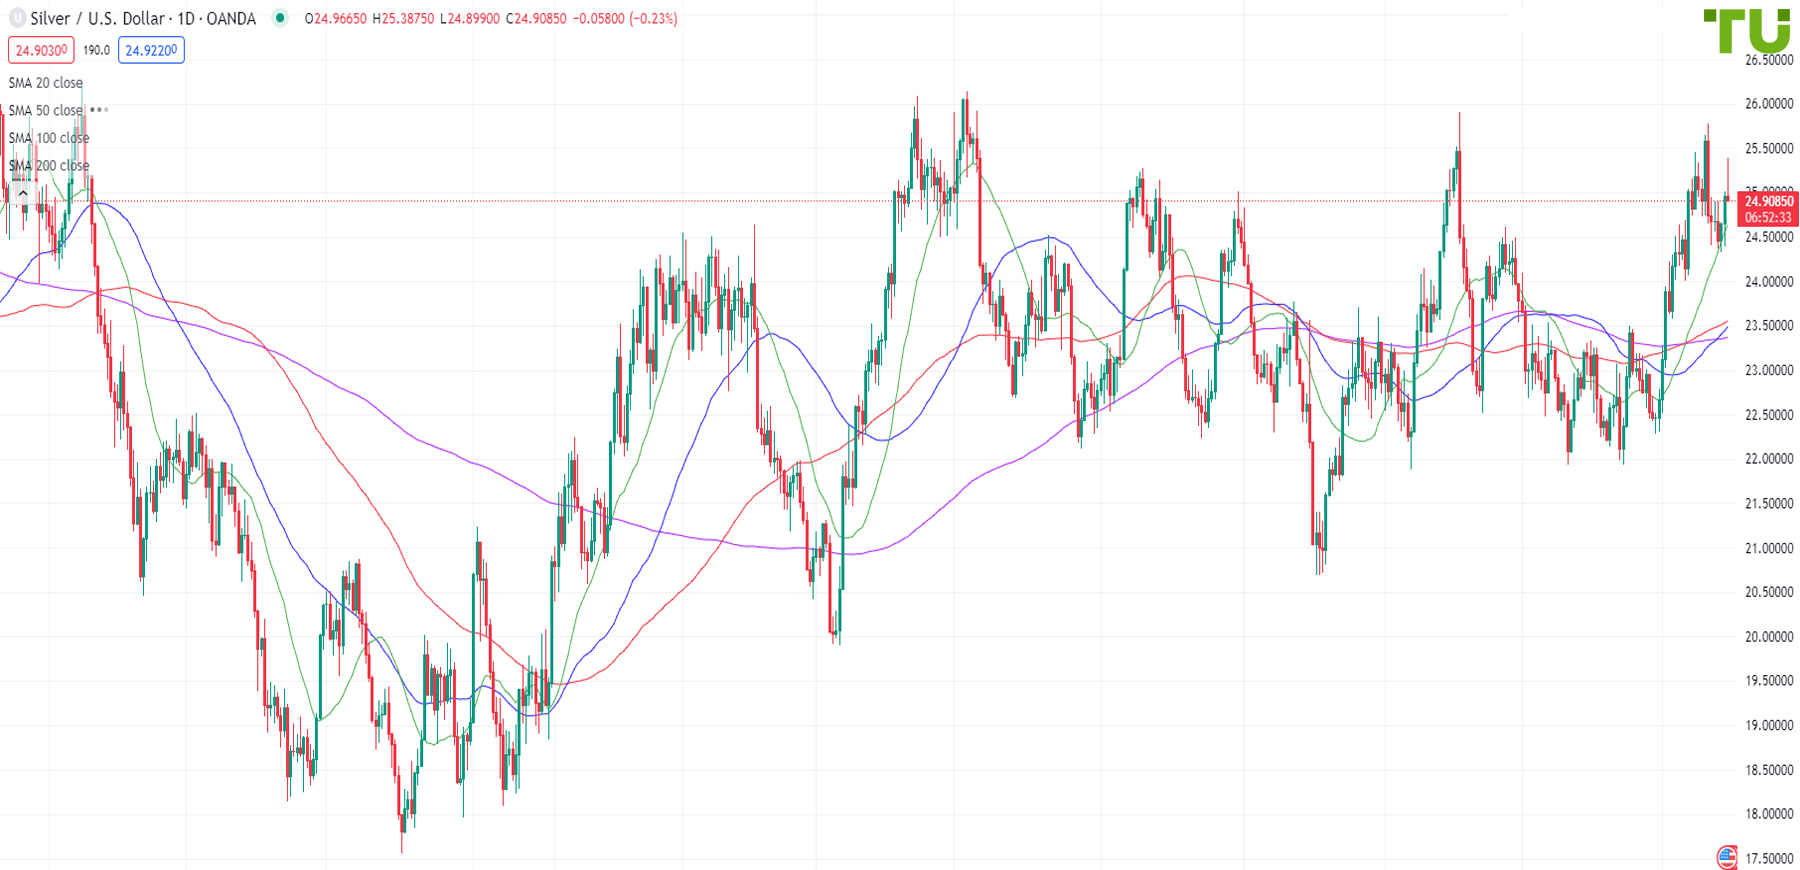 XAG/USD under pressure after a growth attempt